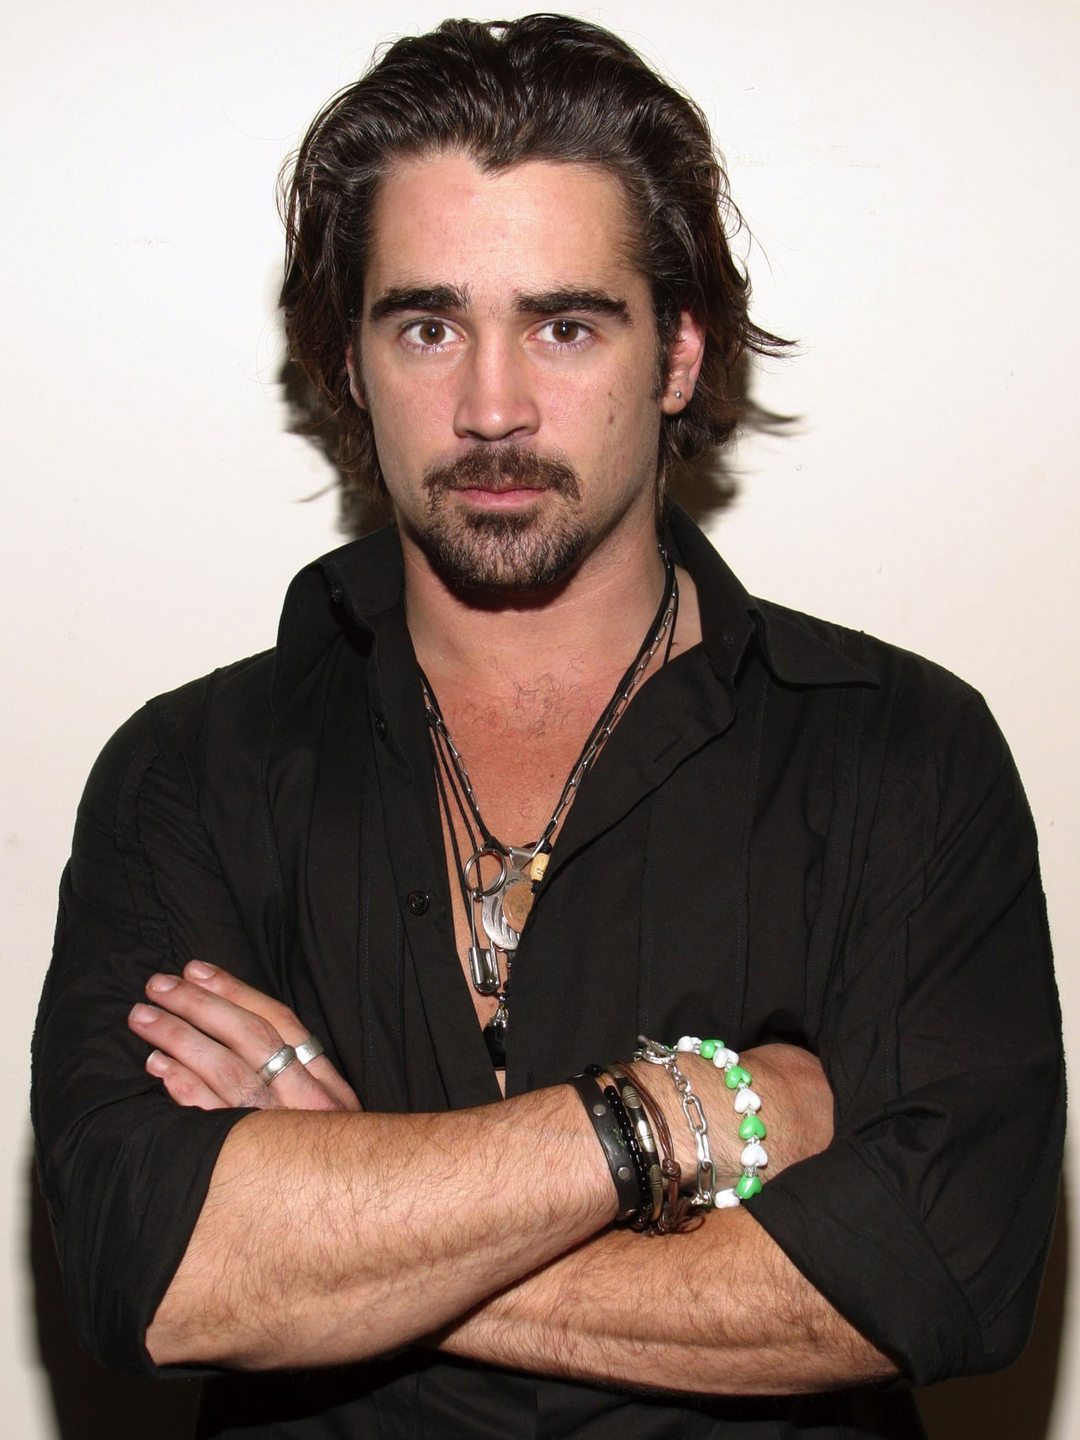 Colin Farrell does he have a wife